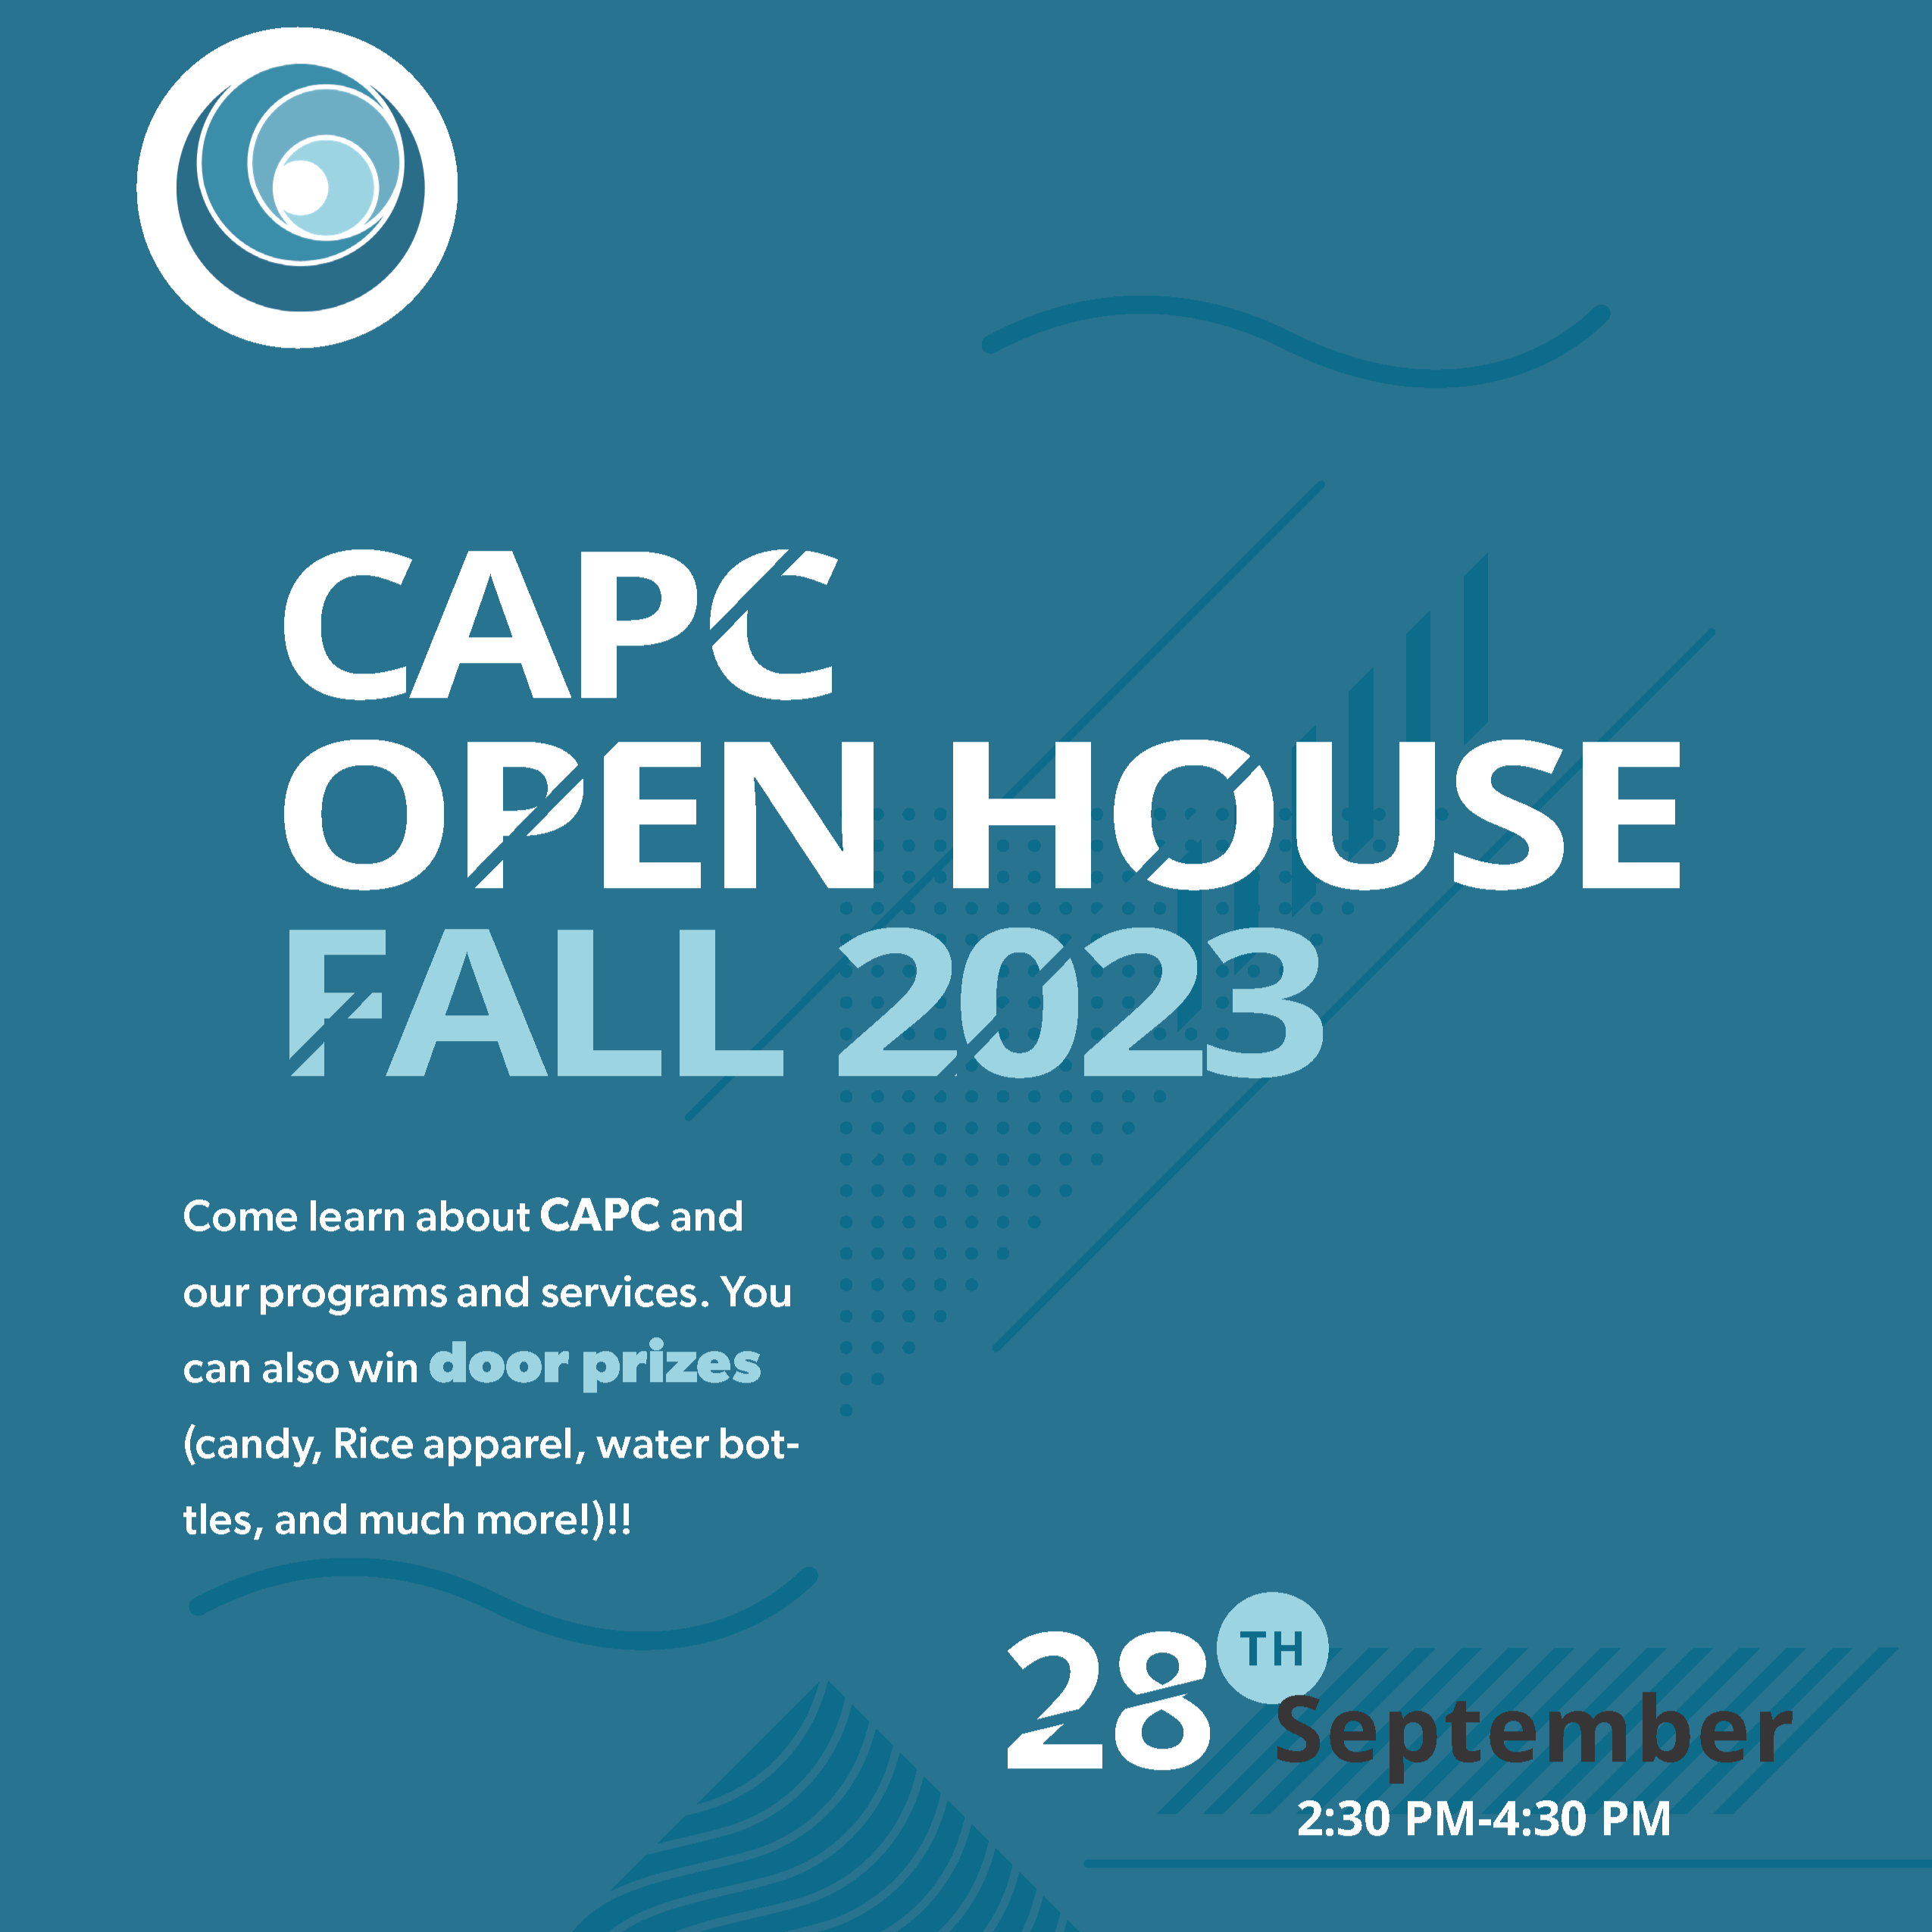 CAPC Open House Fall 2023 text within image